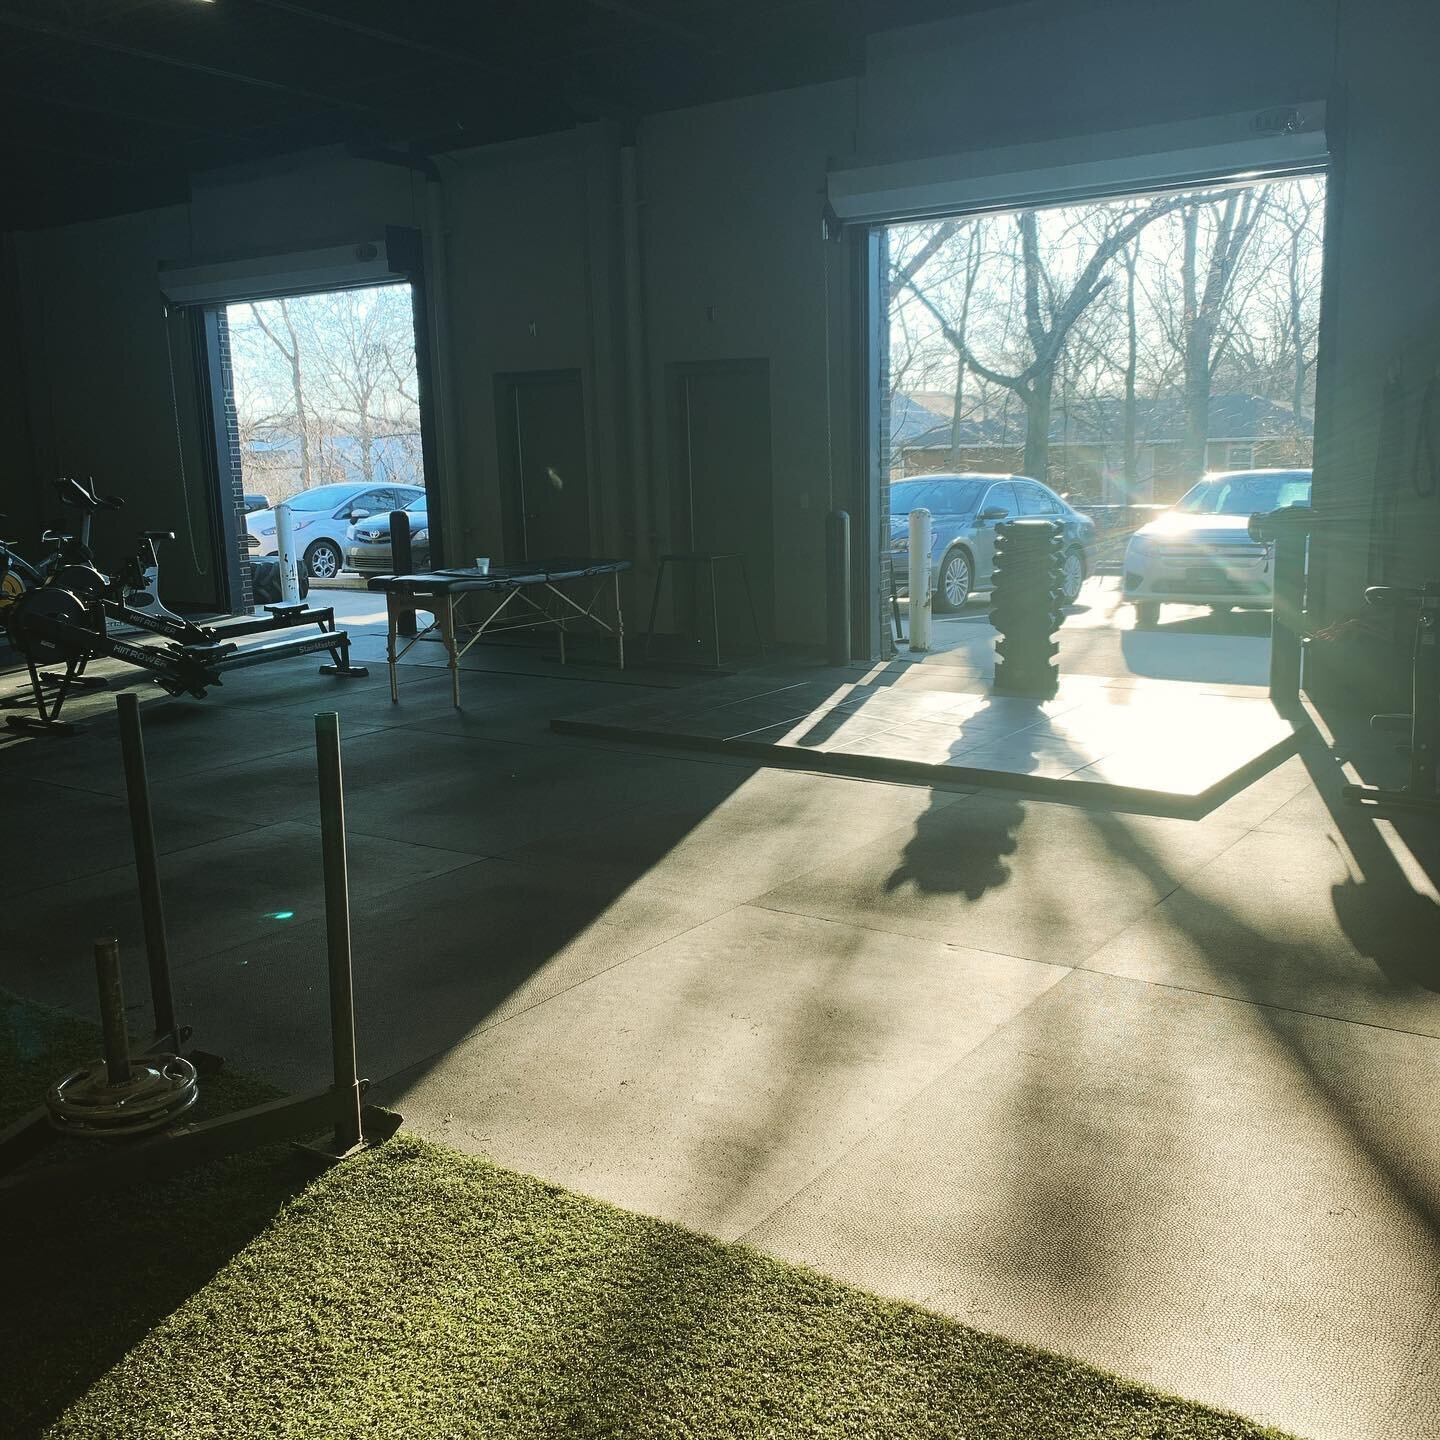 Garage doors open mean spring is coming...right?! Can&rsquo;t wait for more outdoor workouts and sunshine! #overlandpark #healthykc #livefitkc #personaltrainerkc